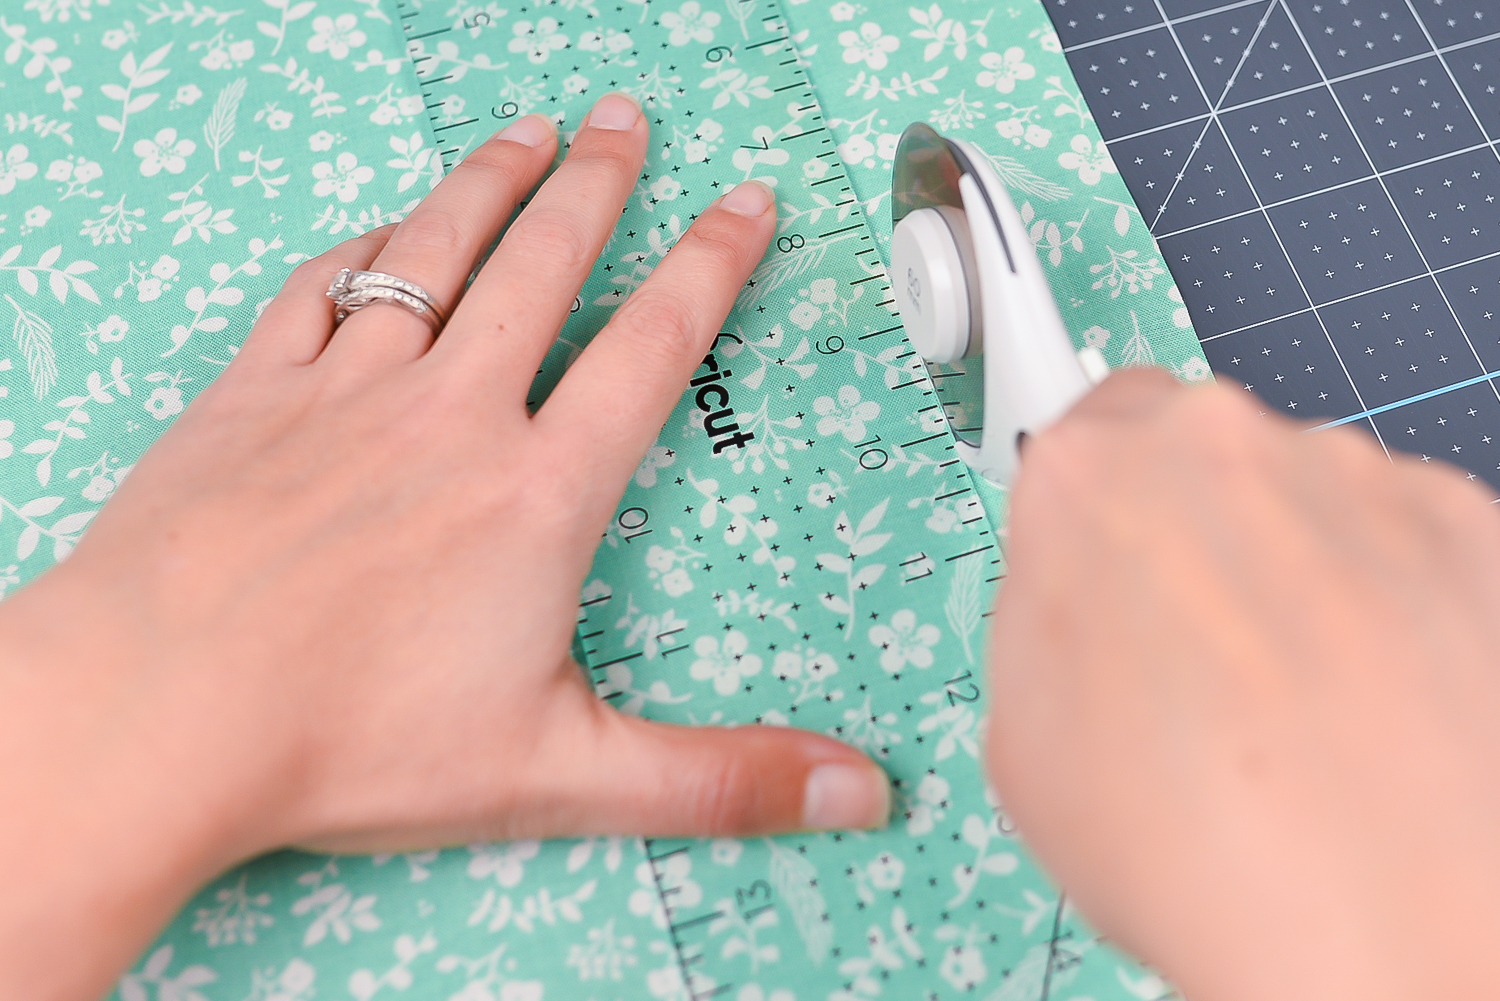 A pair of hands using the Cricut acrylic ruler and the rotary knife cutting a piece of fabric on top of the Crciut self-healing mat